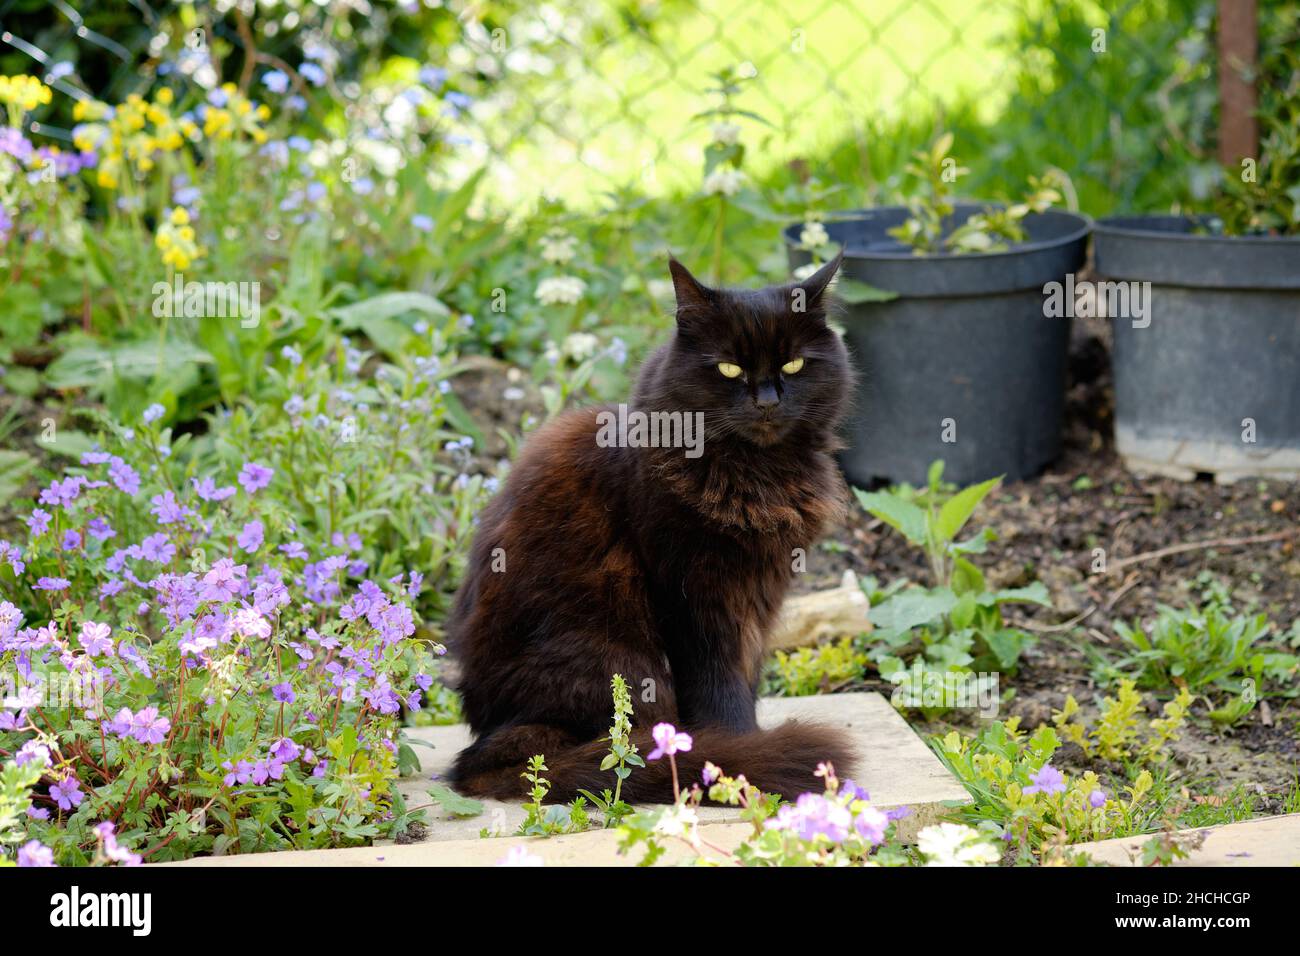 A Black and Brown Domestic Cat, Felis catus, Sitting in the Shade in a Garden Flowerbed during the Summer. Stock Photo